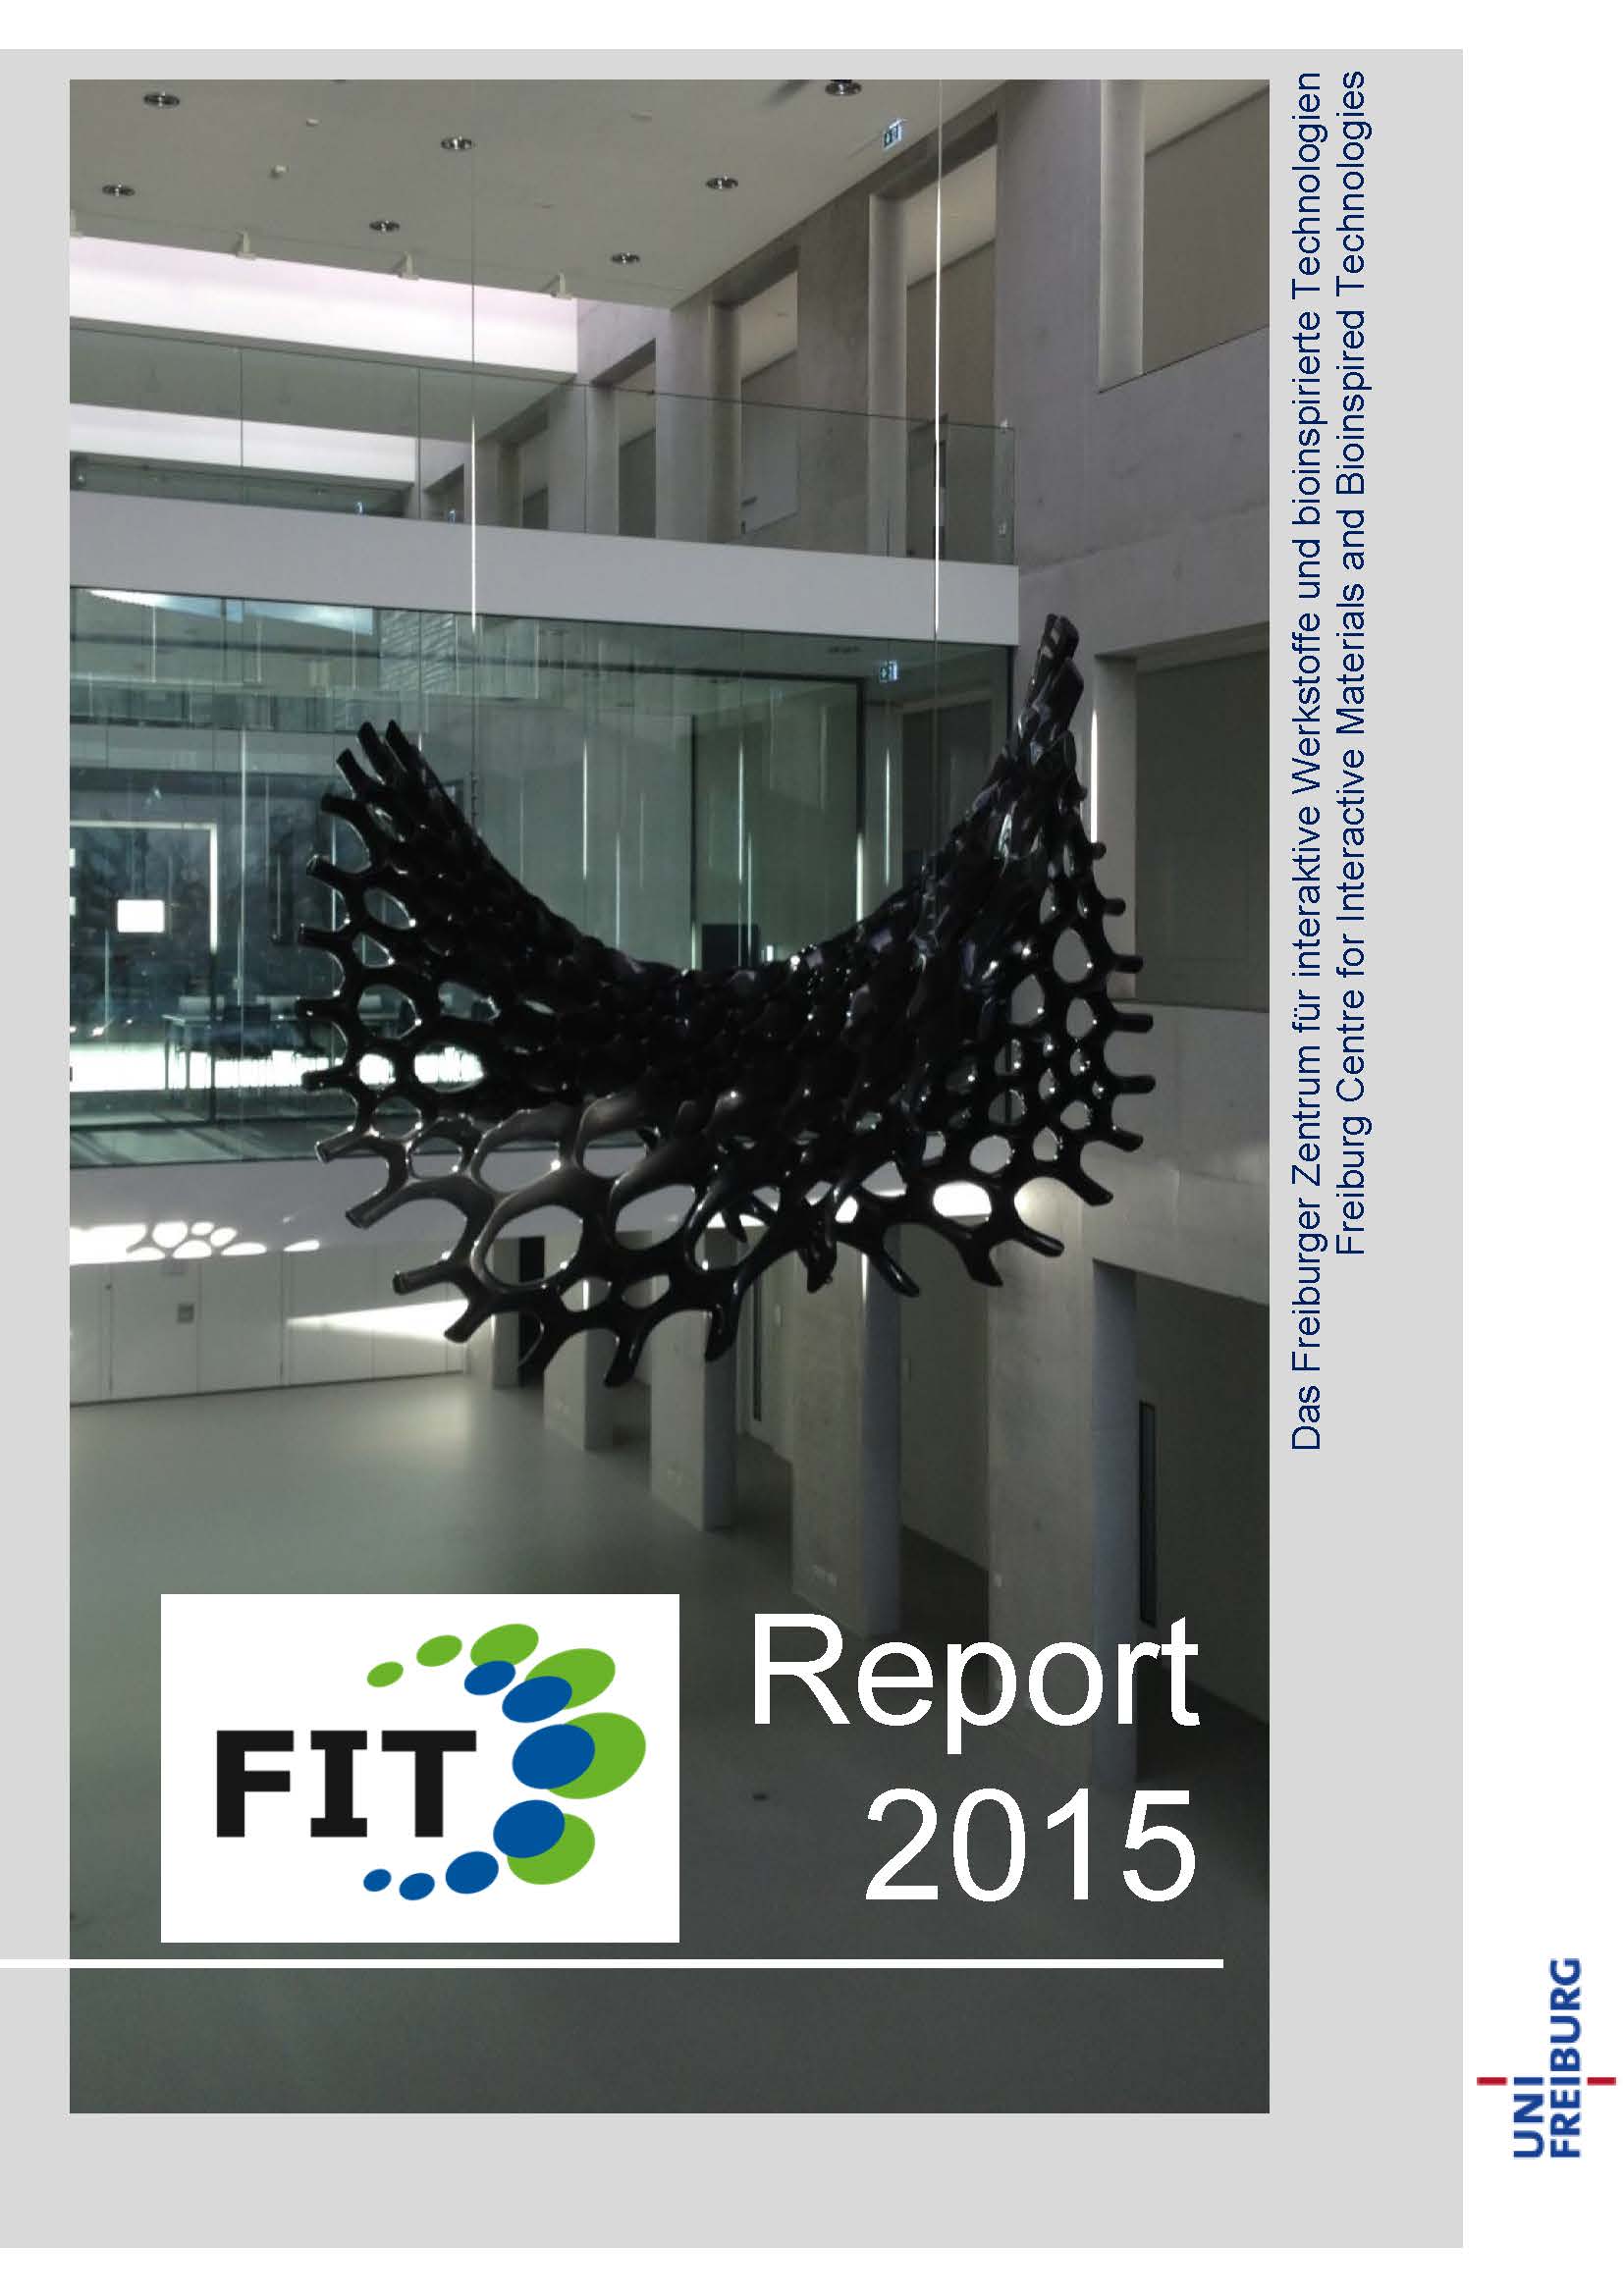 FIT-Report 2015 published